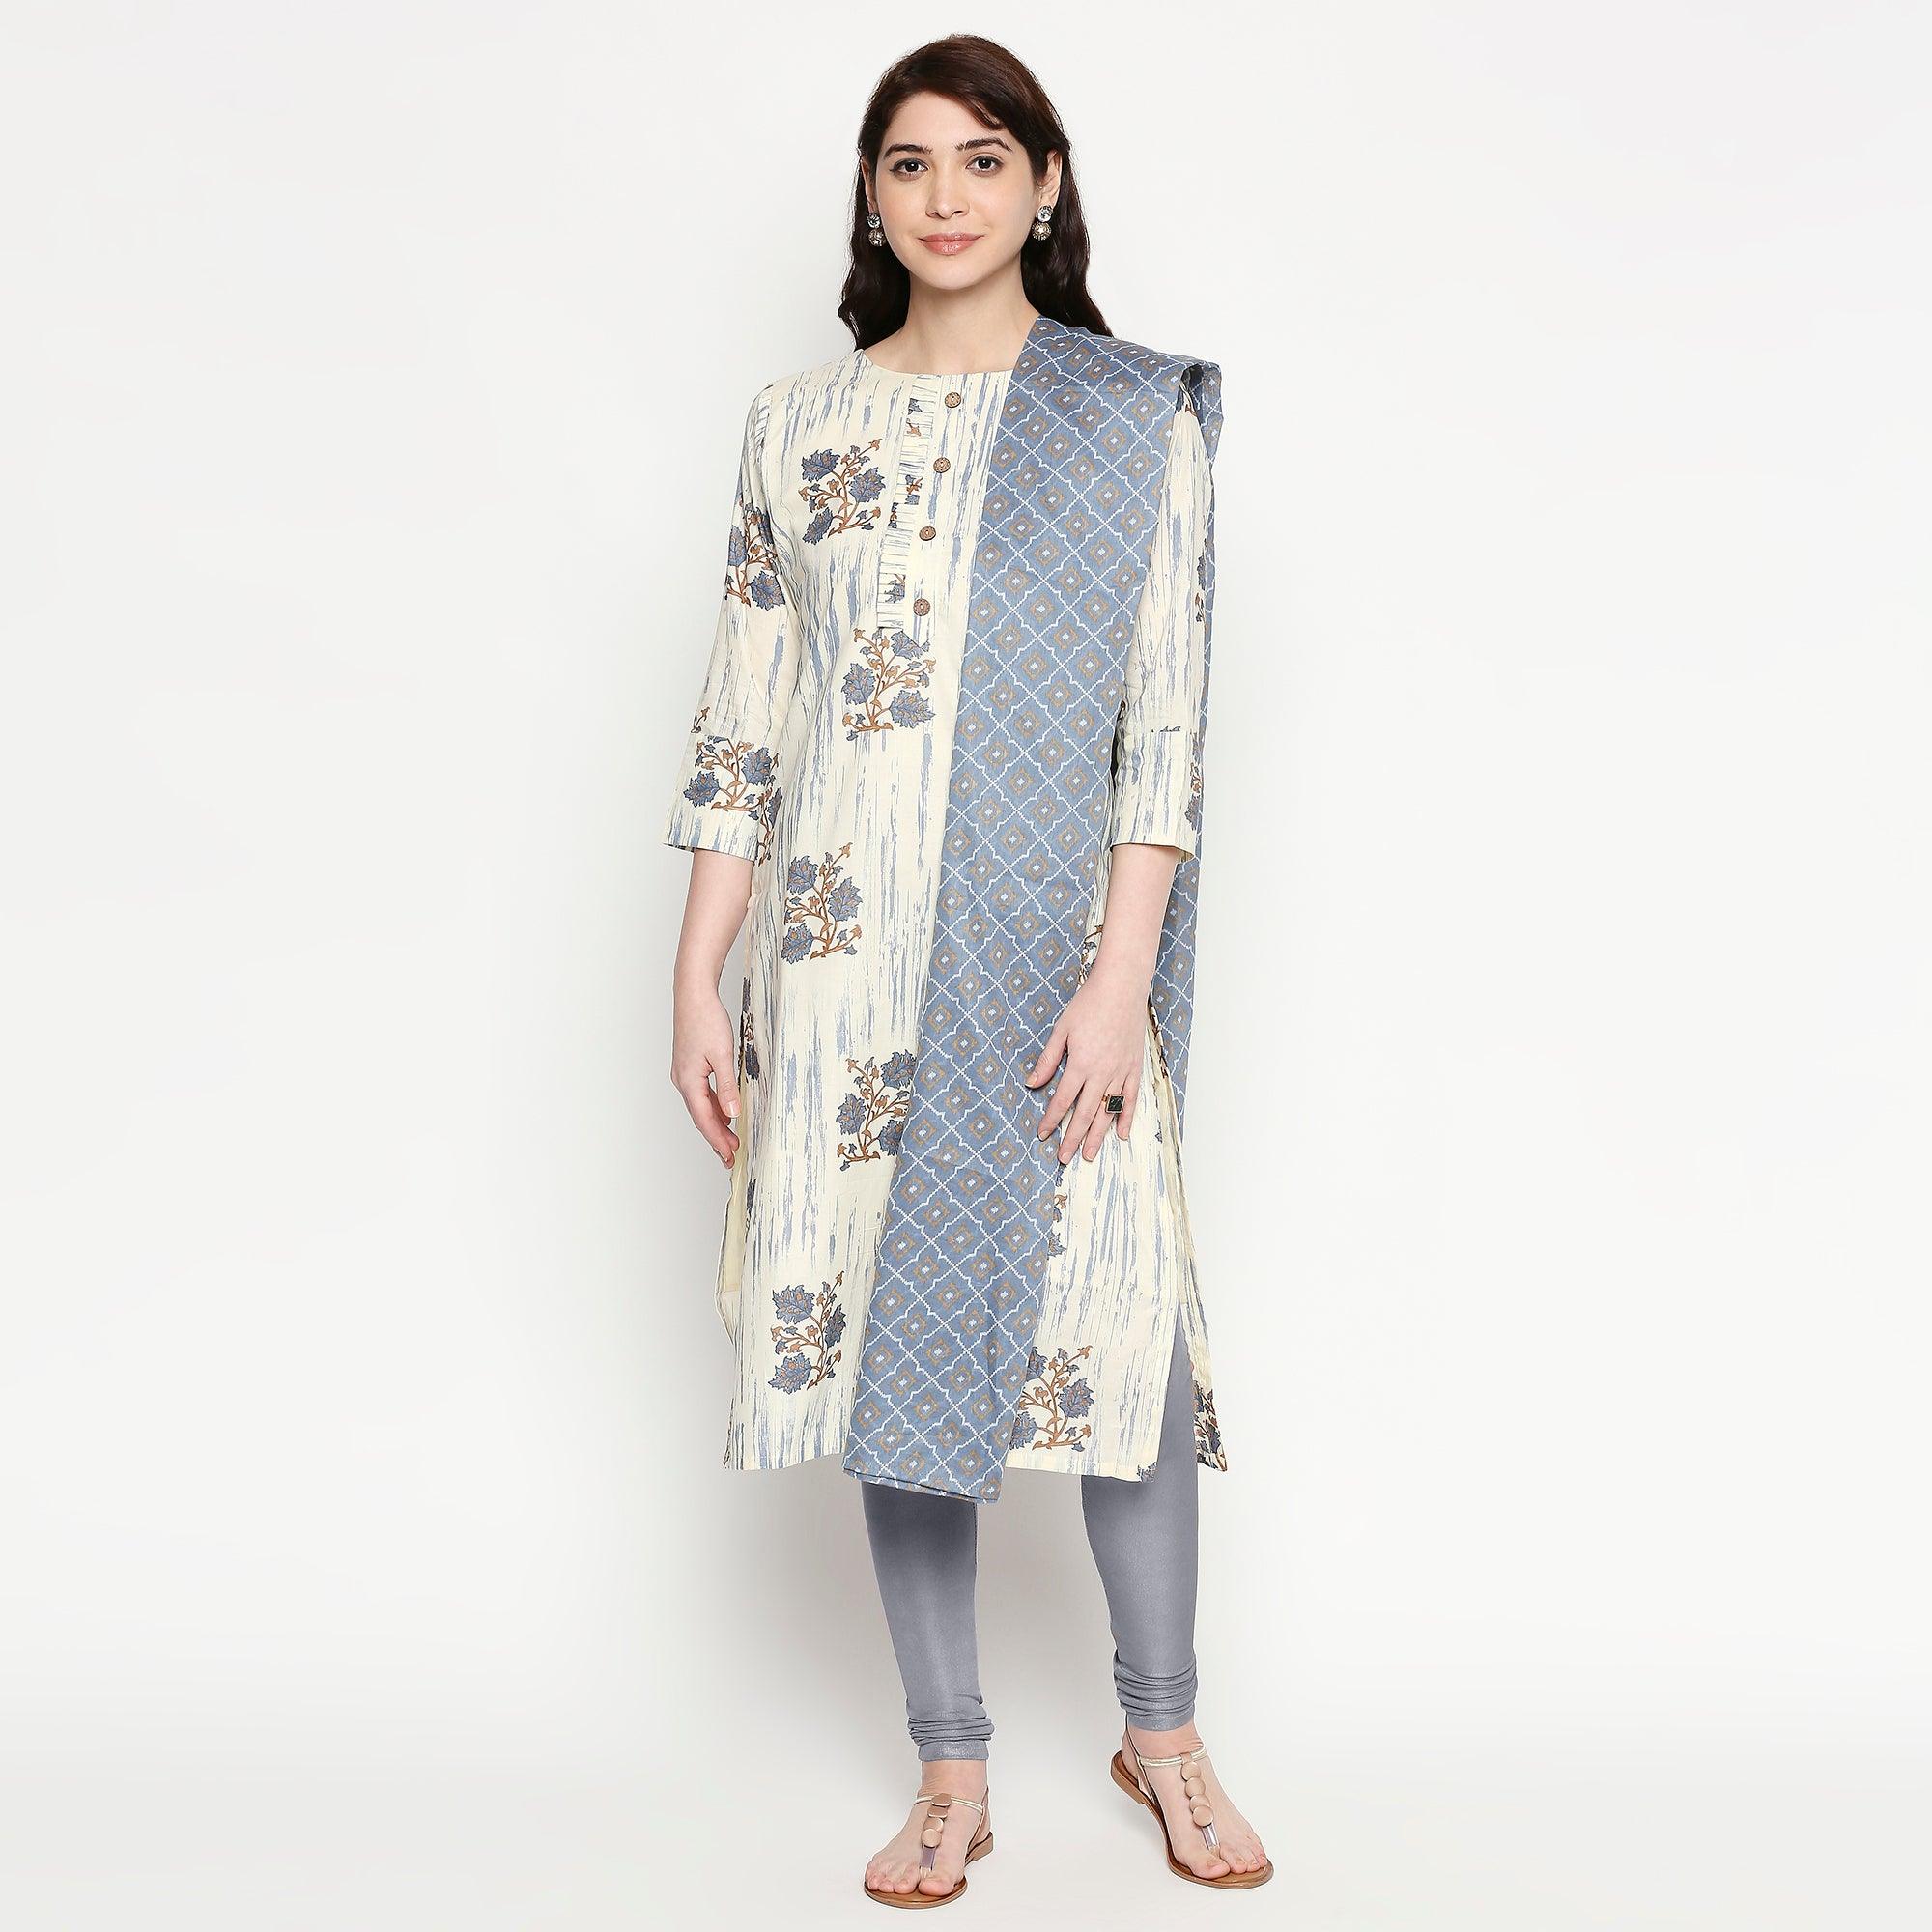 Glorious White-Grey Colored Casual Wear Floral Printed Cotton Kurti With Dupatta - Peachmode